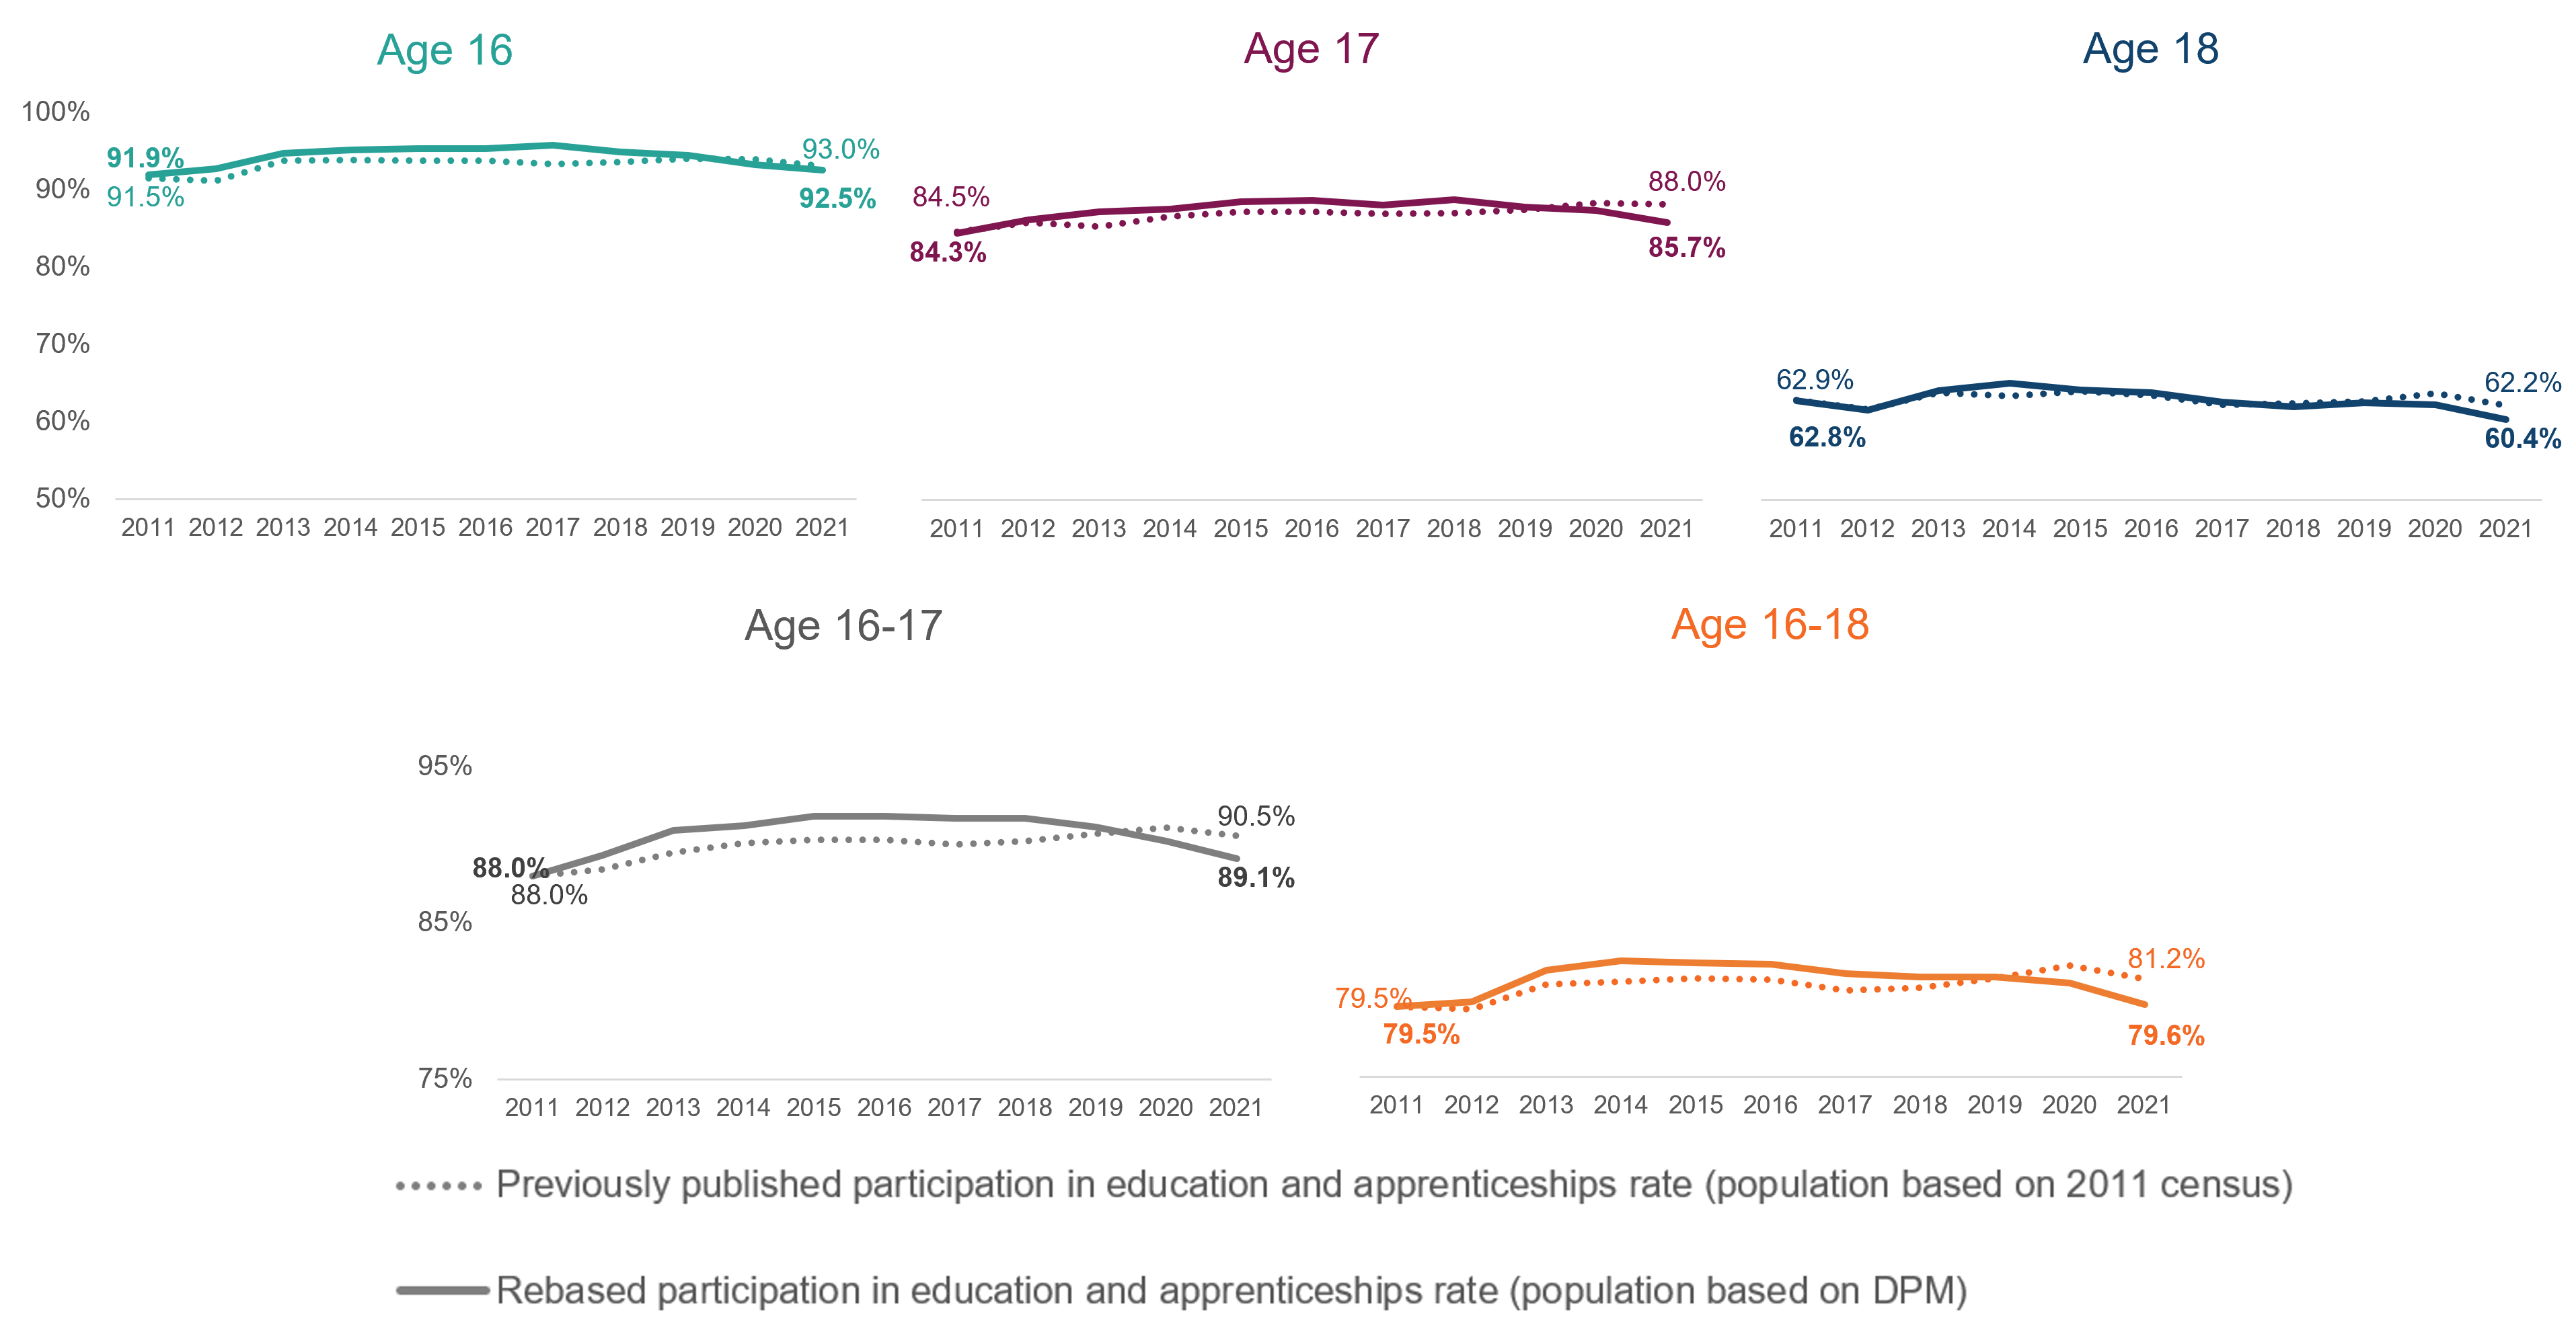 Comparisons of previously published participation in education and apprenticeship rate against the new rebased rate 2011-2021 for ages 16,17,18,16-17 and 16-18. The general trend at all ages was previously an under estimation of participation up to 2019 and an over estimation in 2020 and 2021. 